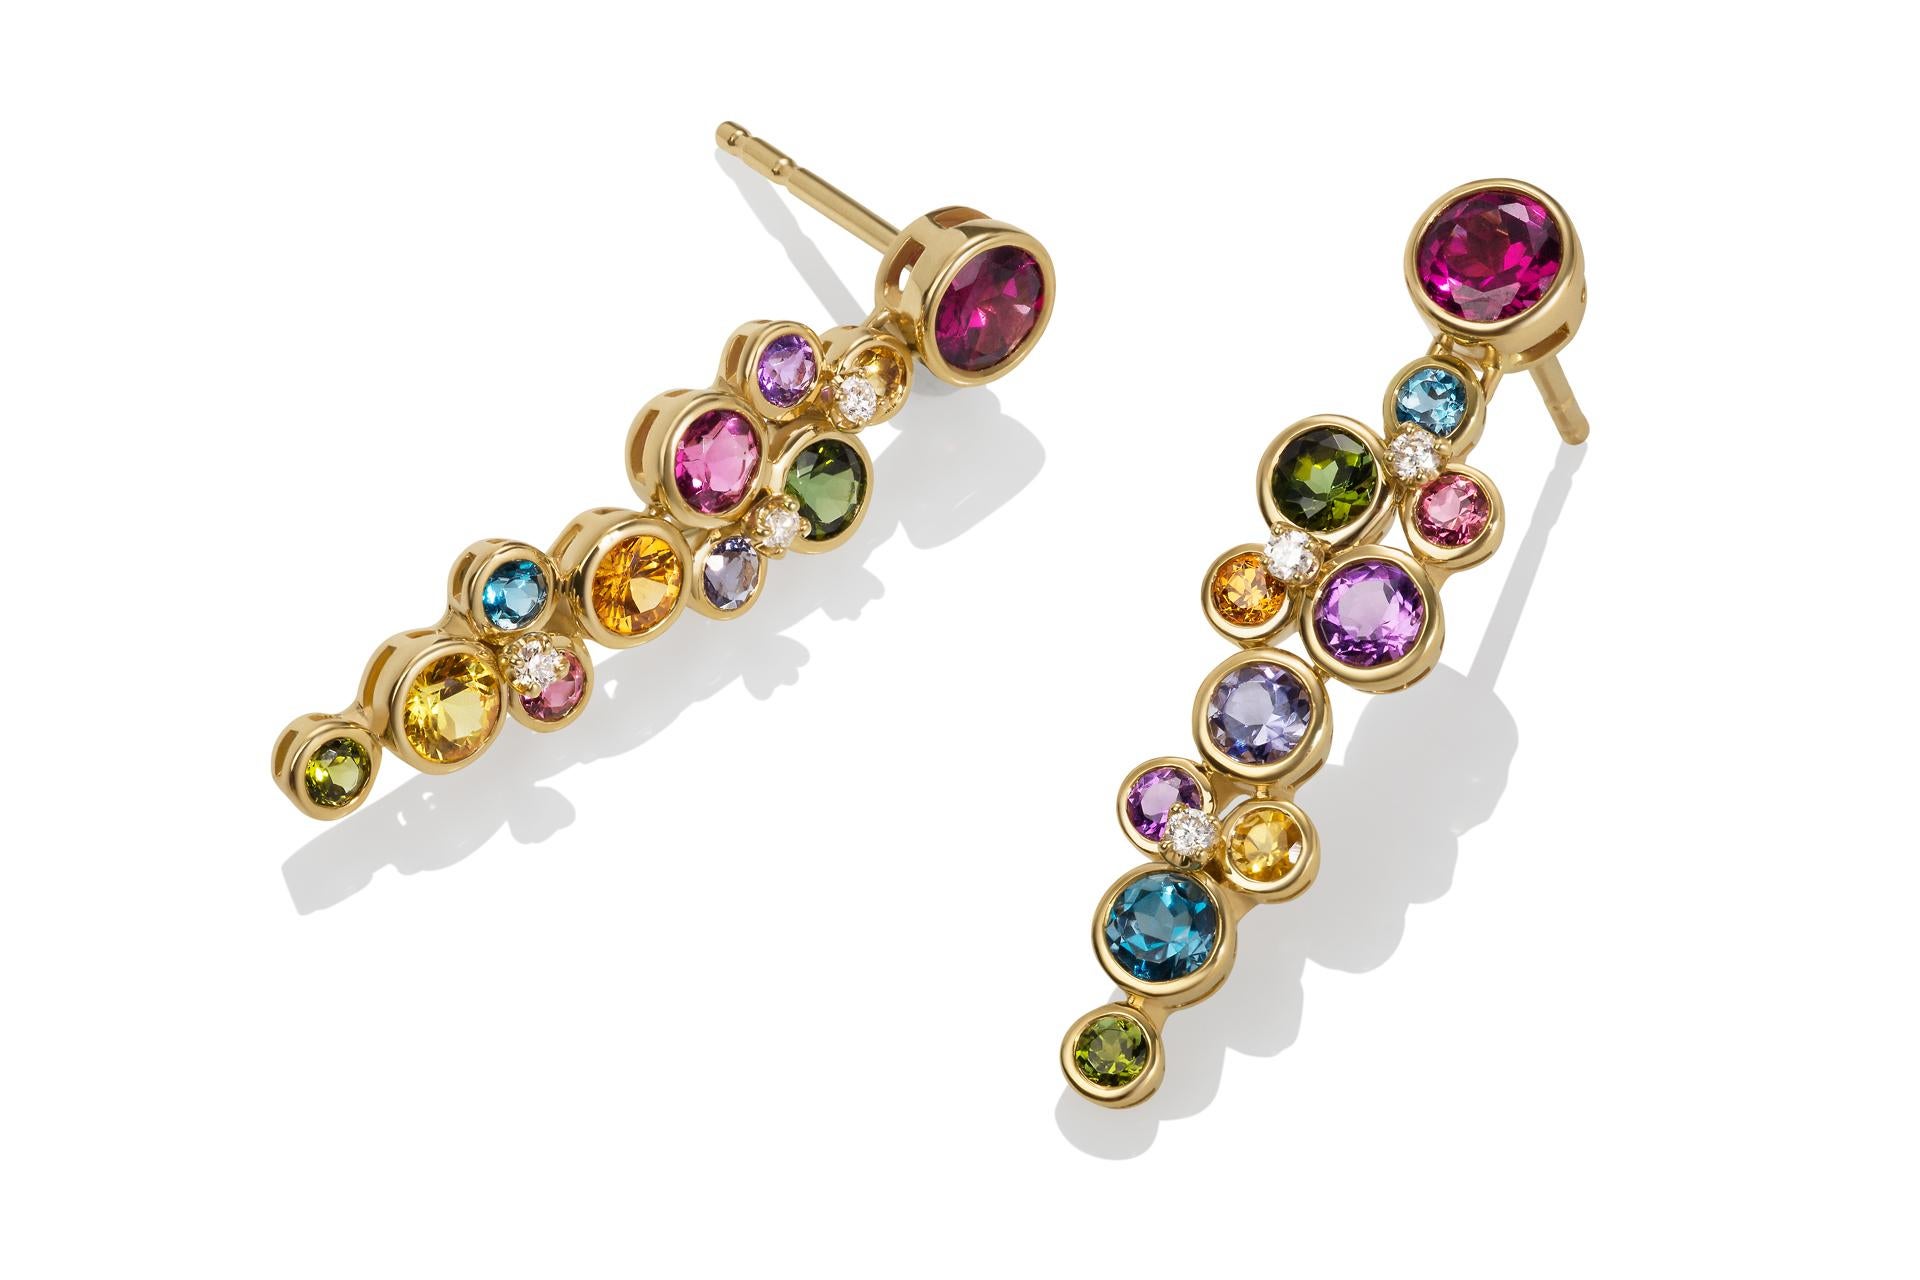 Celebrate the stars!! And color.... Don't keep these earrings in your lock box - these are meant to be worn!!! 
These Constellation earrings are 14ky with 1.65 ct of multi-color gemstones and diamonds. The gemstones include Toumaline, citrine,